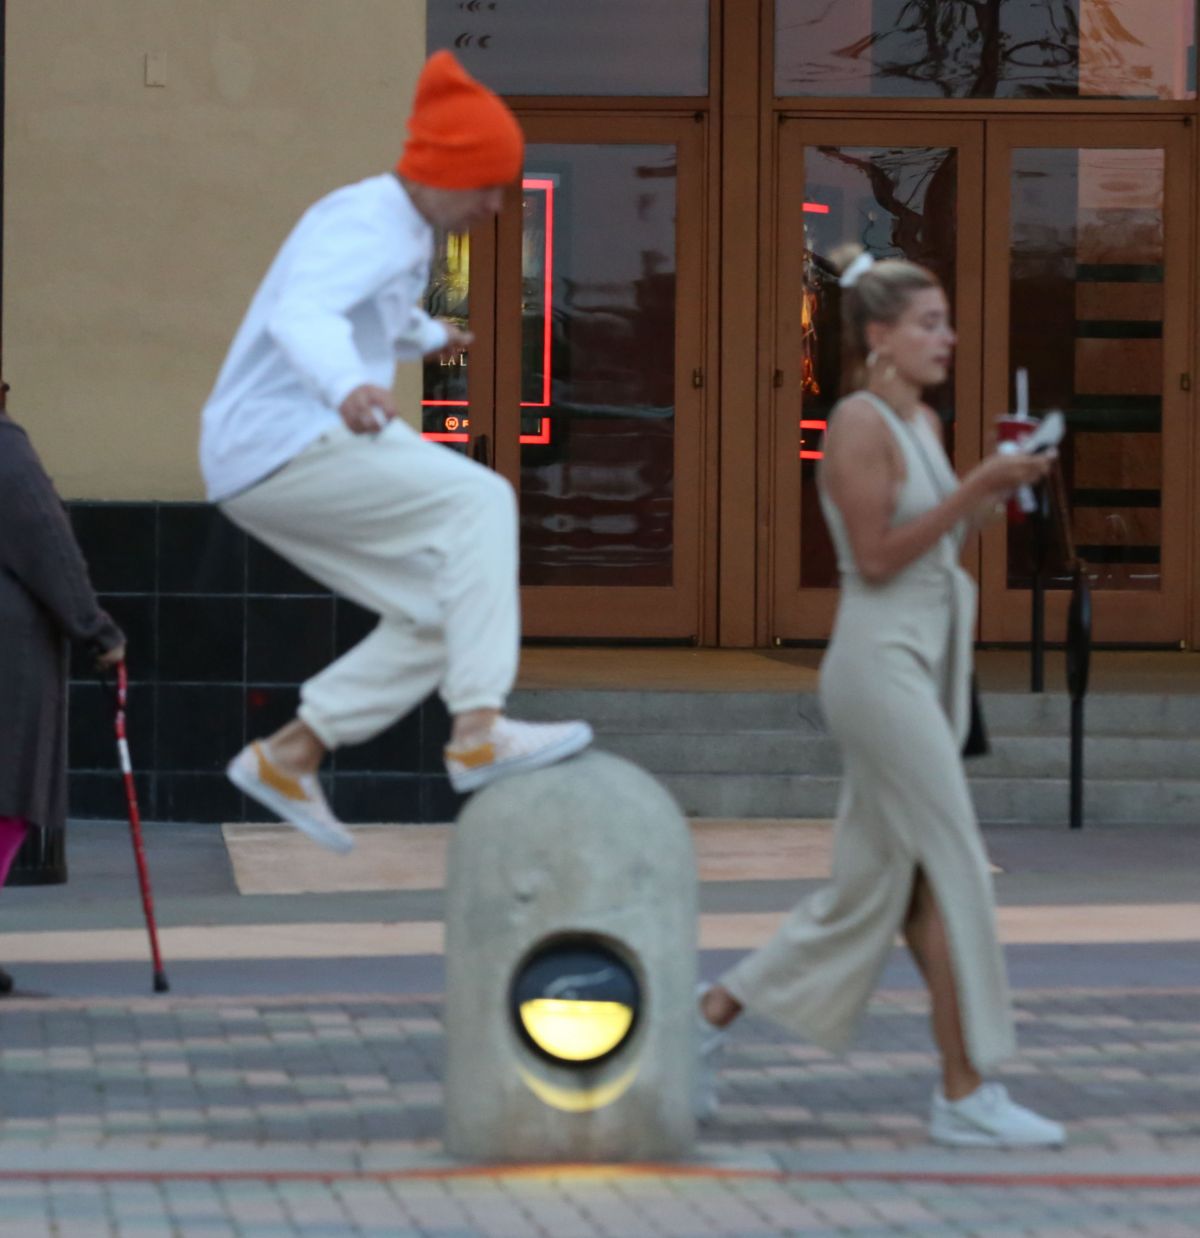 hailey-and-justin-bieber-out-in-los-angeles-03-30-2019-16.jpg